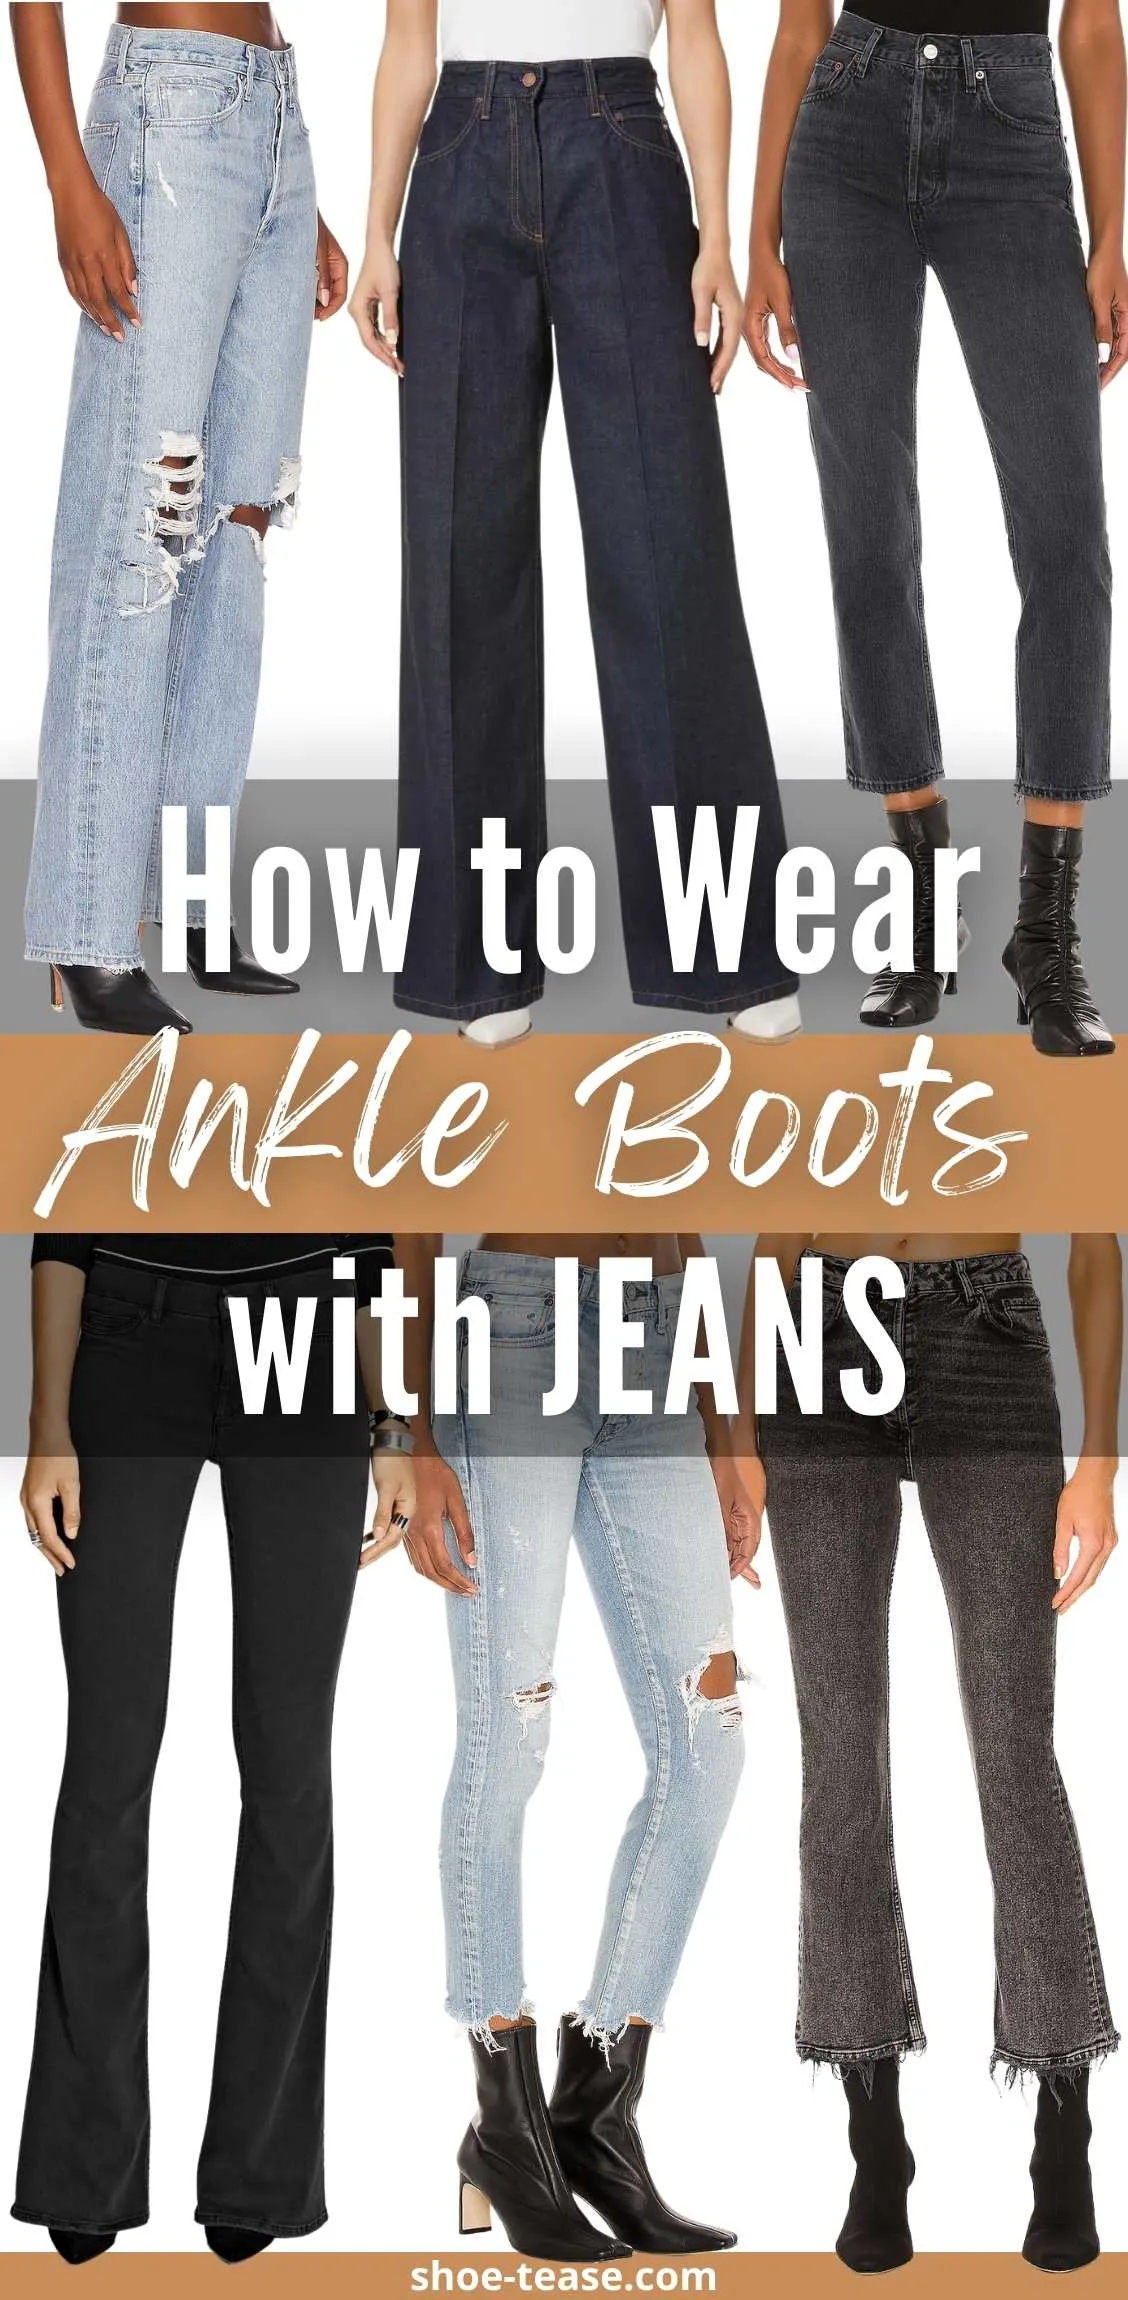 How To Wear Jeans With Ankle Boots